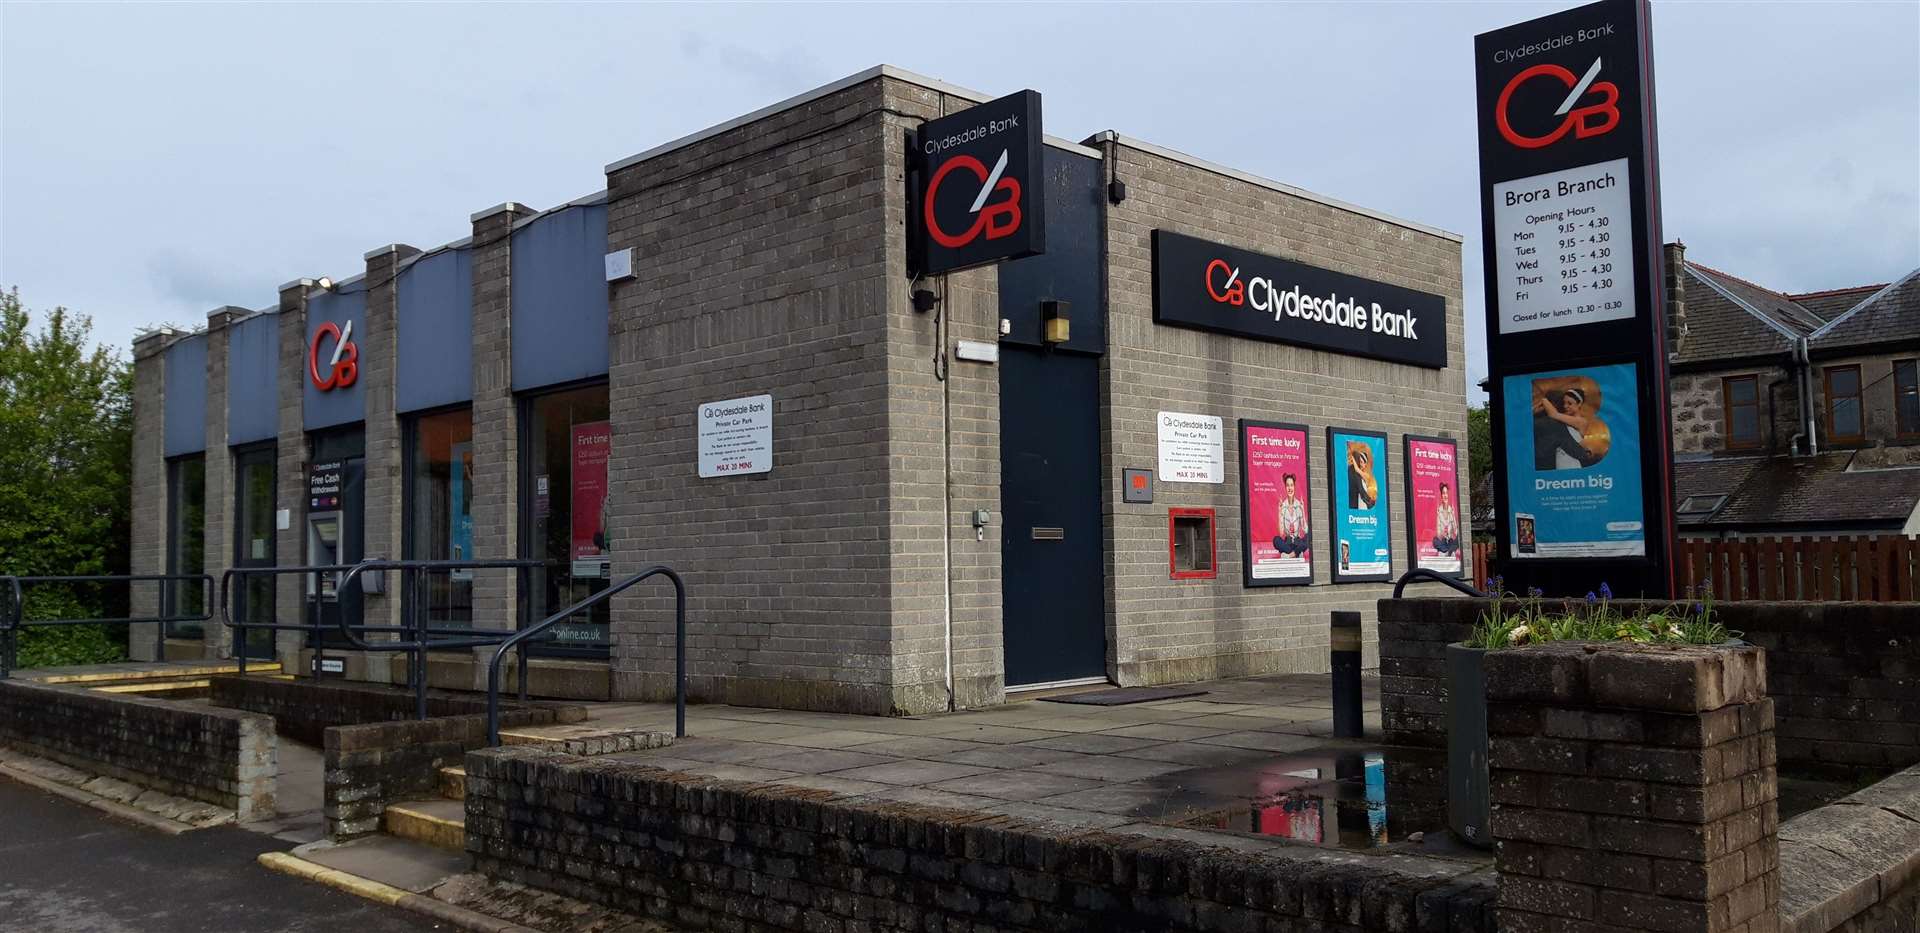 The Clydesdale Bank in Brora has become another casualty of sweeping changes in the industry.